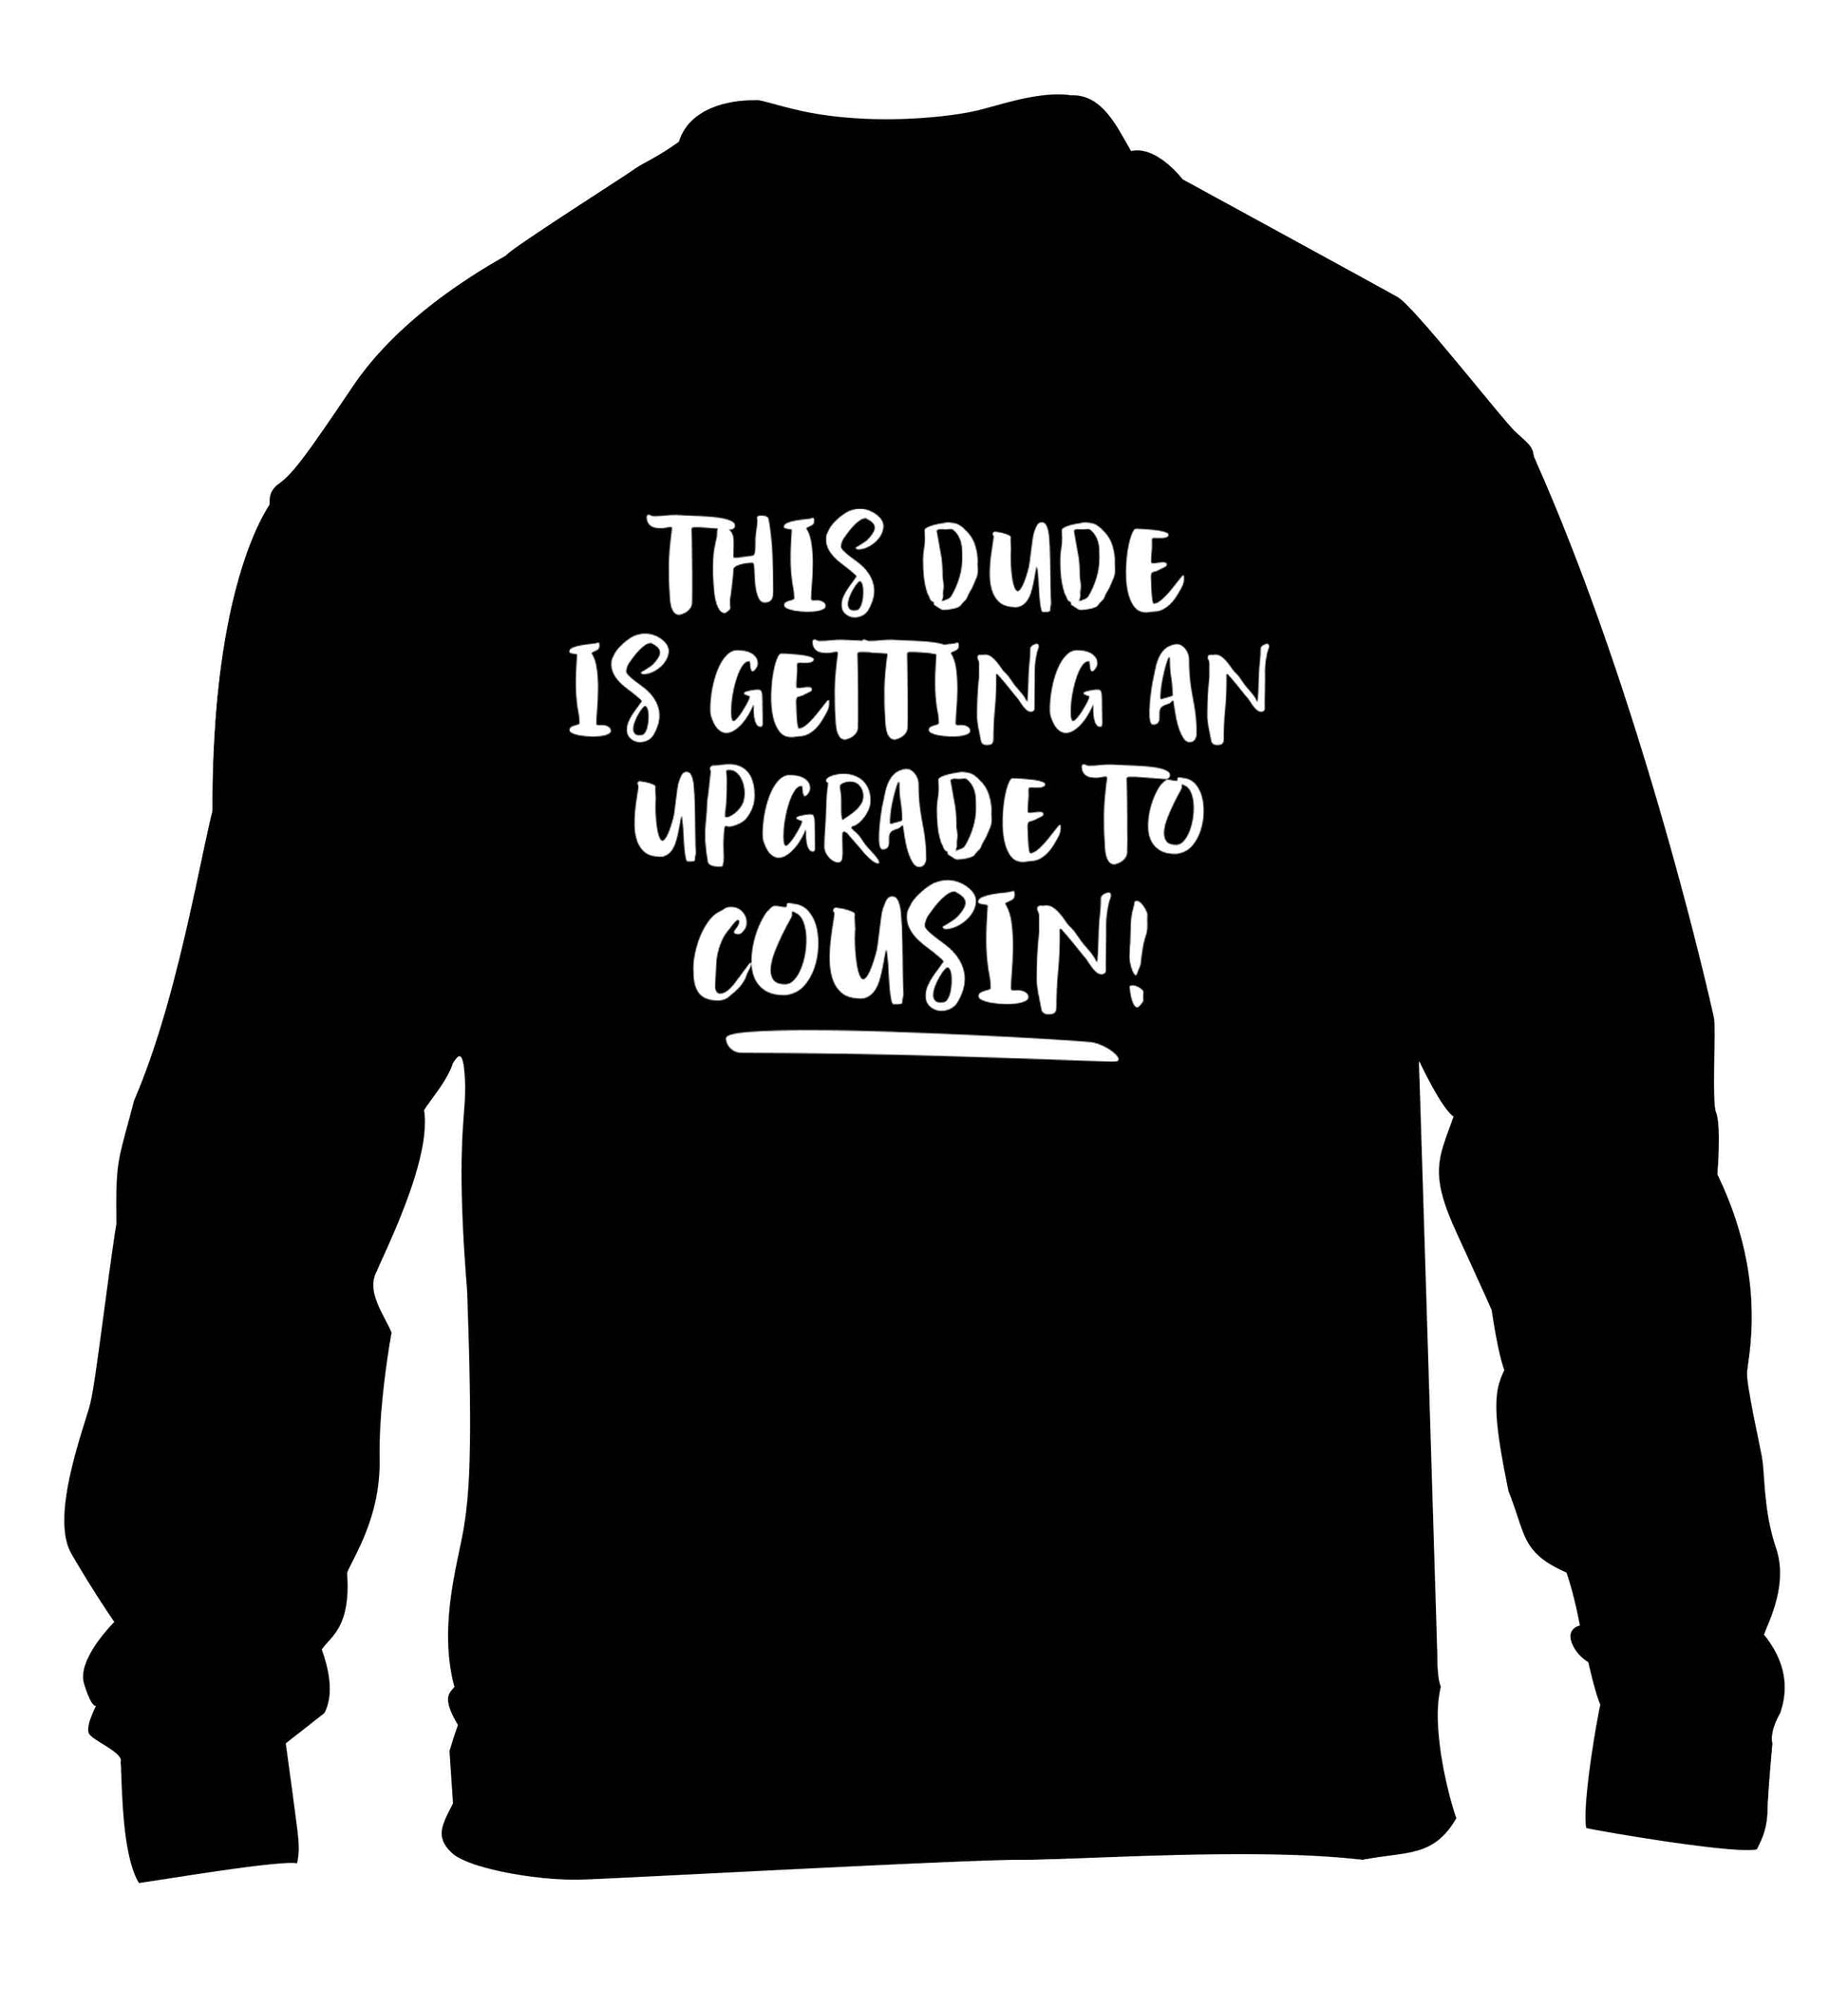 This dude is getting an upgrade to cousin! children's black sweater 12-13 Years